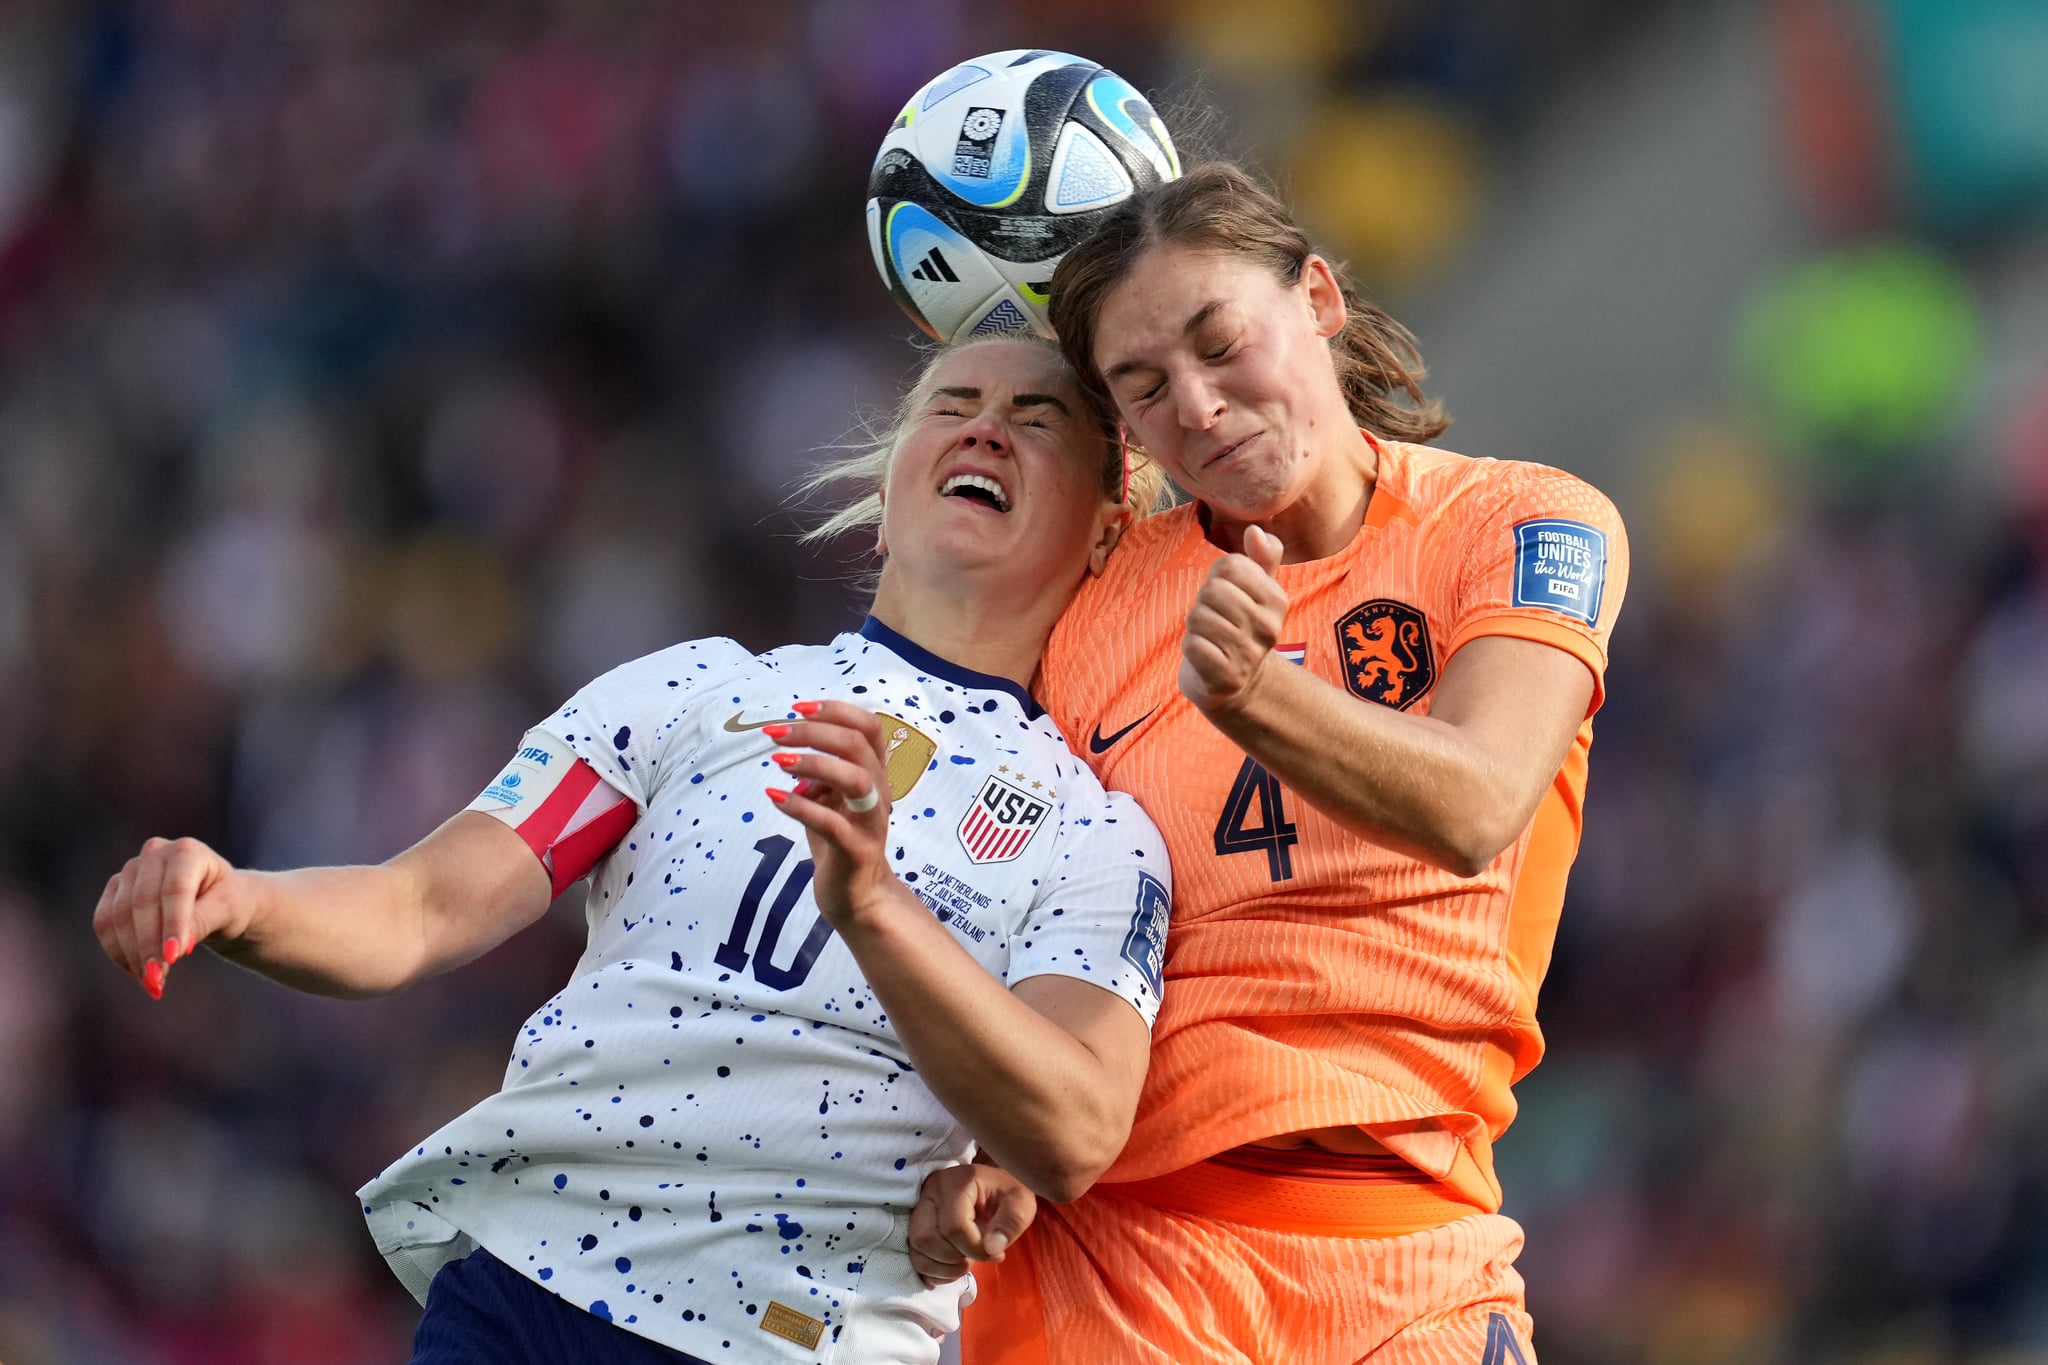 WELLINGTON, NEW ZEALAND - JULY 27: Lindsey Horan #10 of the United States goes up for a header with Aniek Nouwen #4 of the Netherlands during the second half of the FIFA Women's World Cup Australia & New Zealand 2023 Group E match at Wellington Regional Stadium on July 27, 2023 in Wellington, New Zealand. (Photo by Robin Alam/USSF/Getty Images )